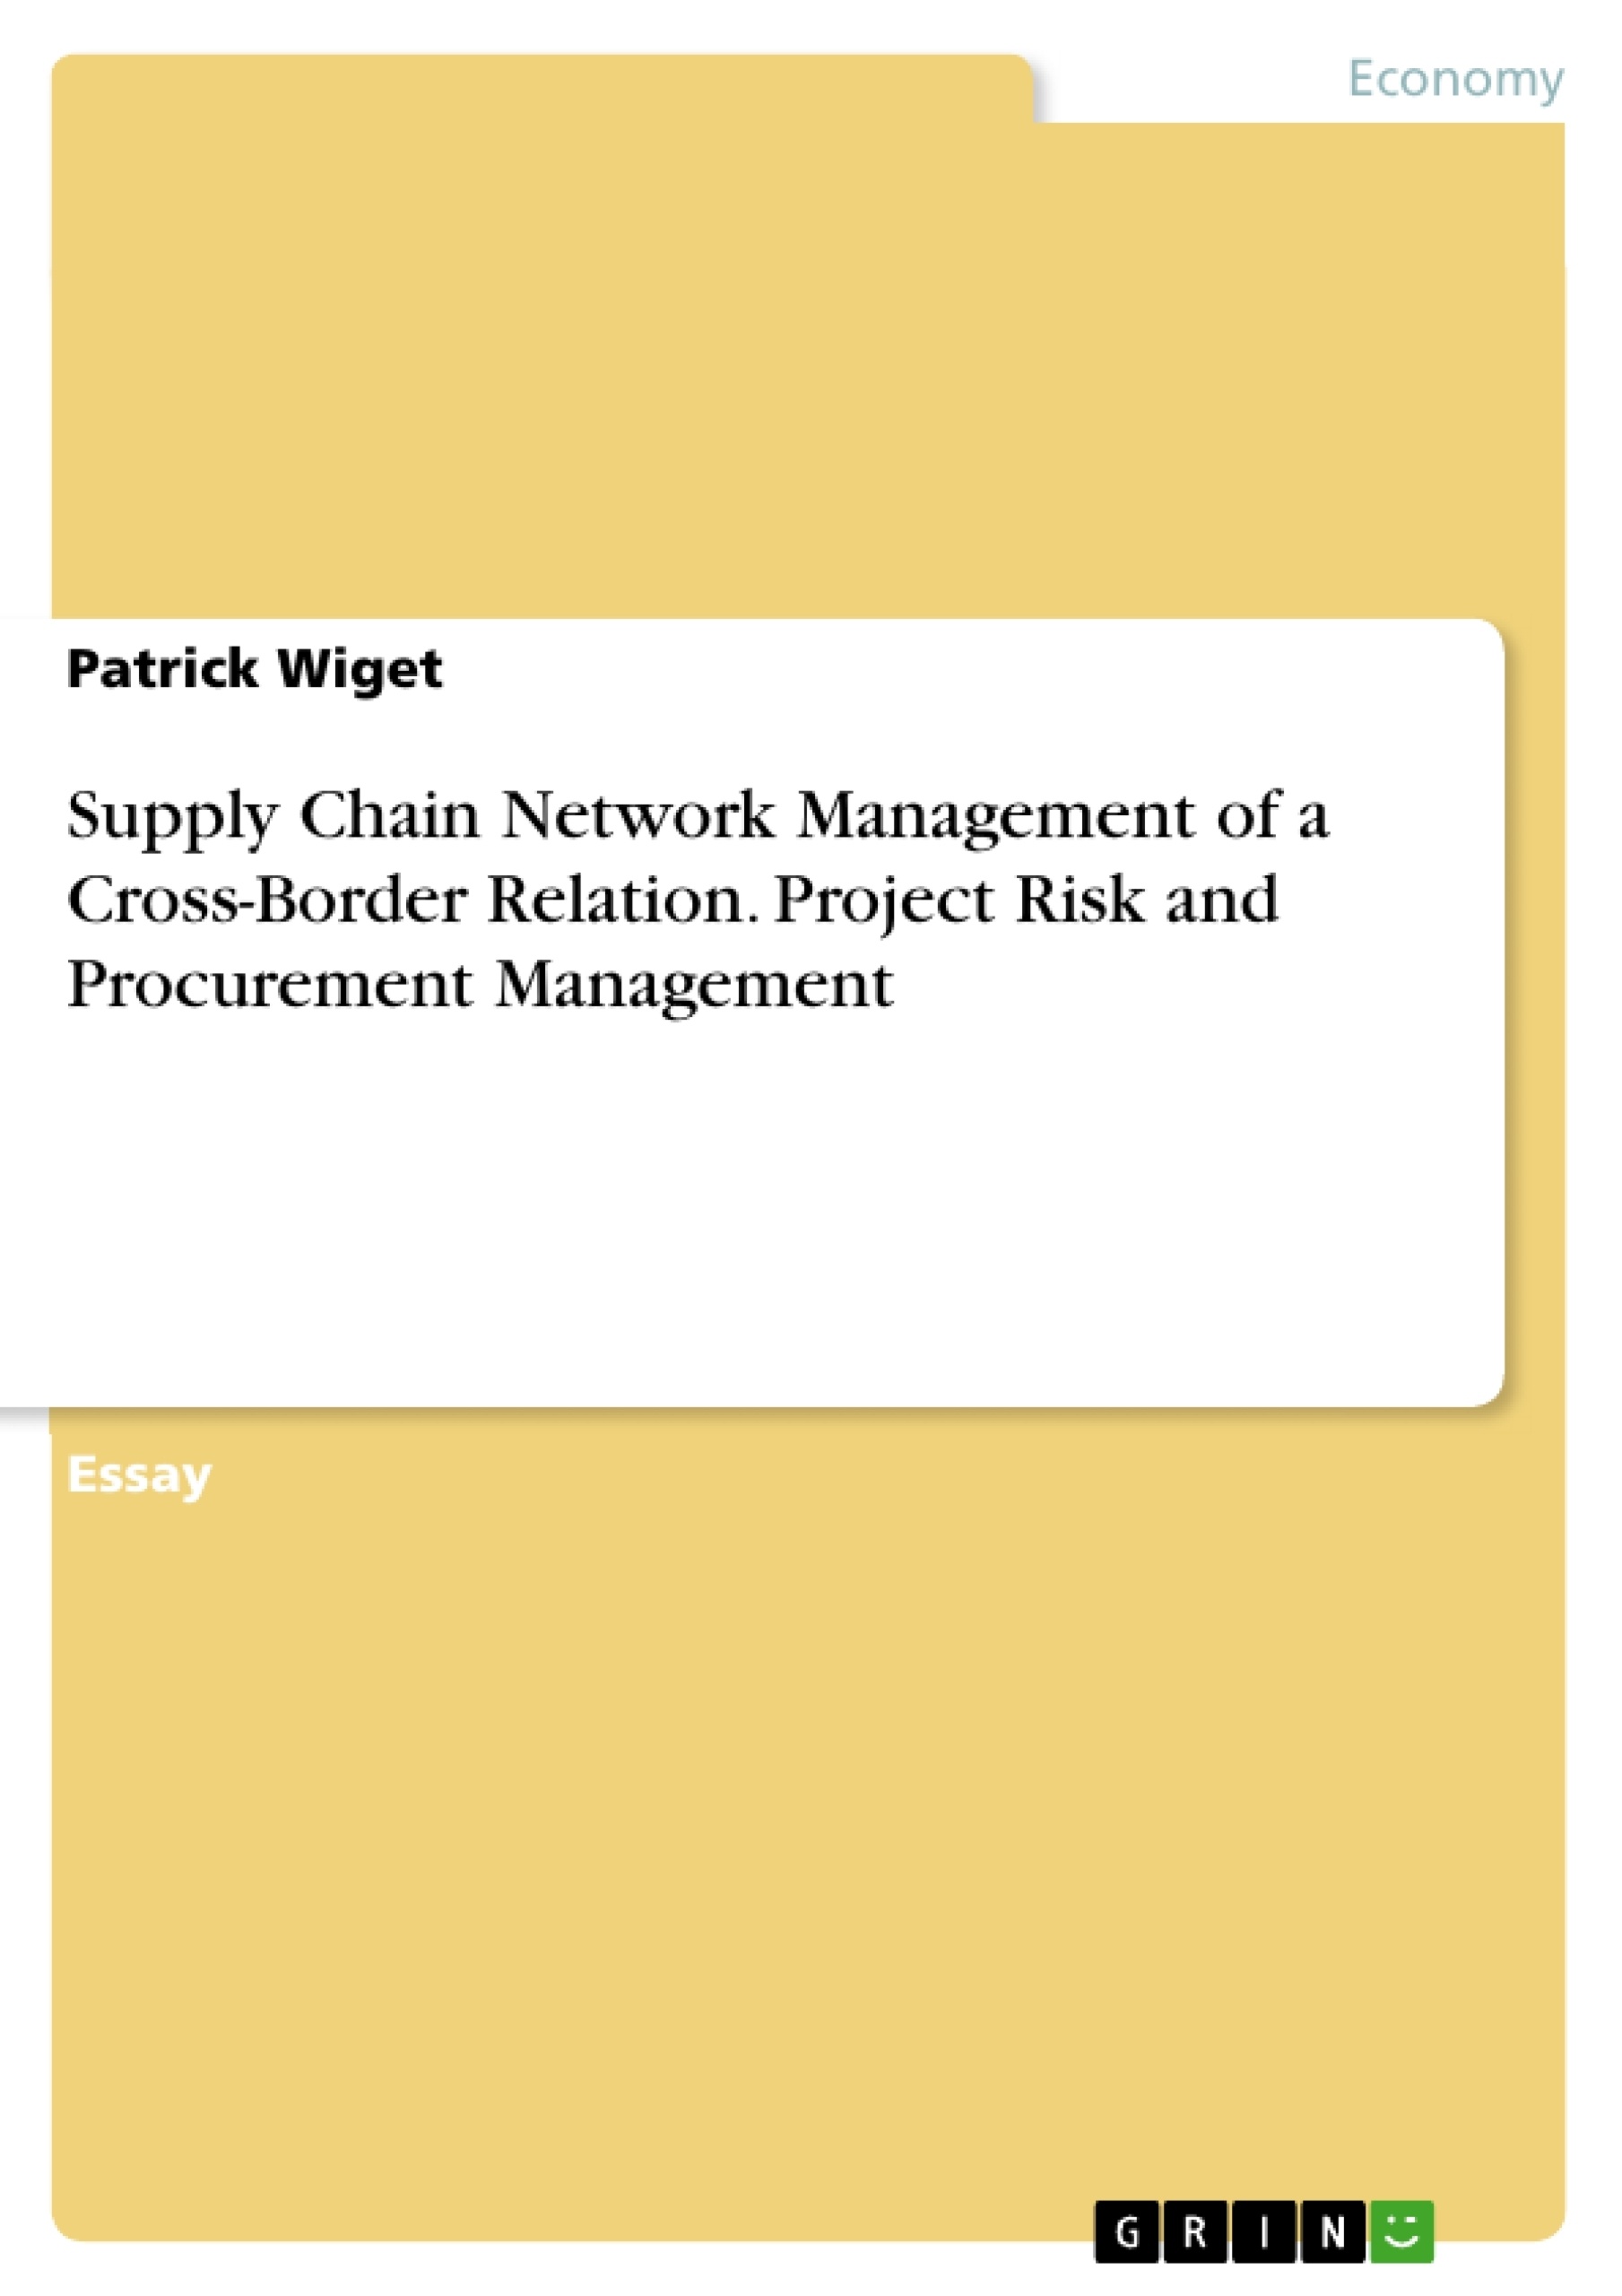 Title: Supply Chain Network Management of a Cross-Border Relation. Project Risk and Procurement Management